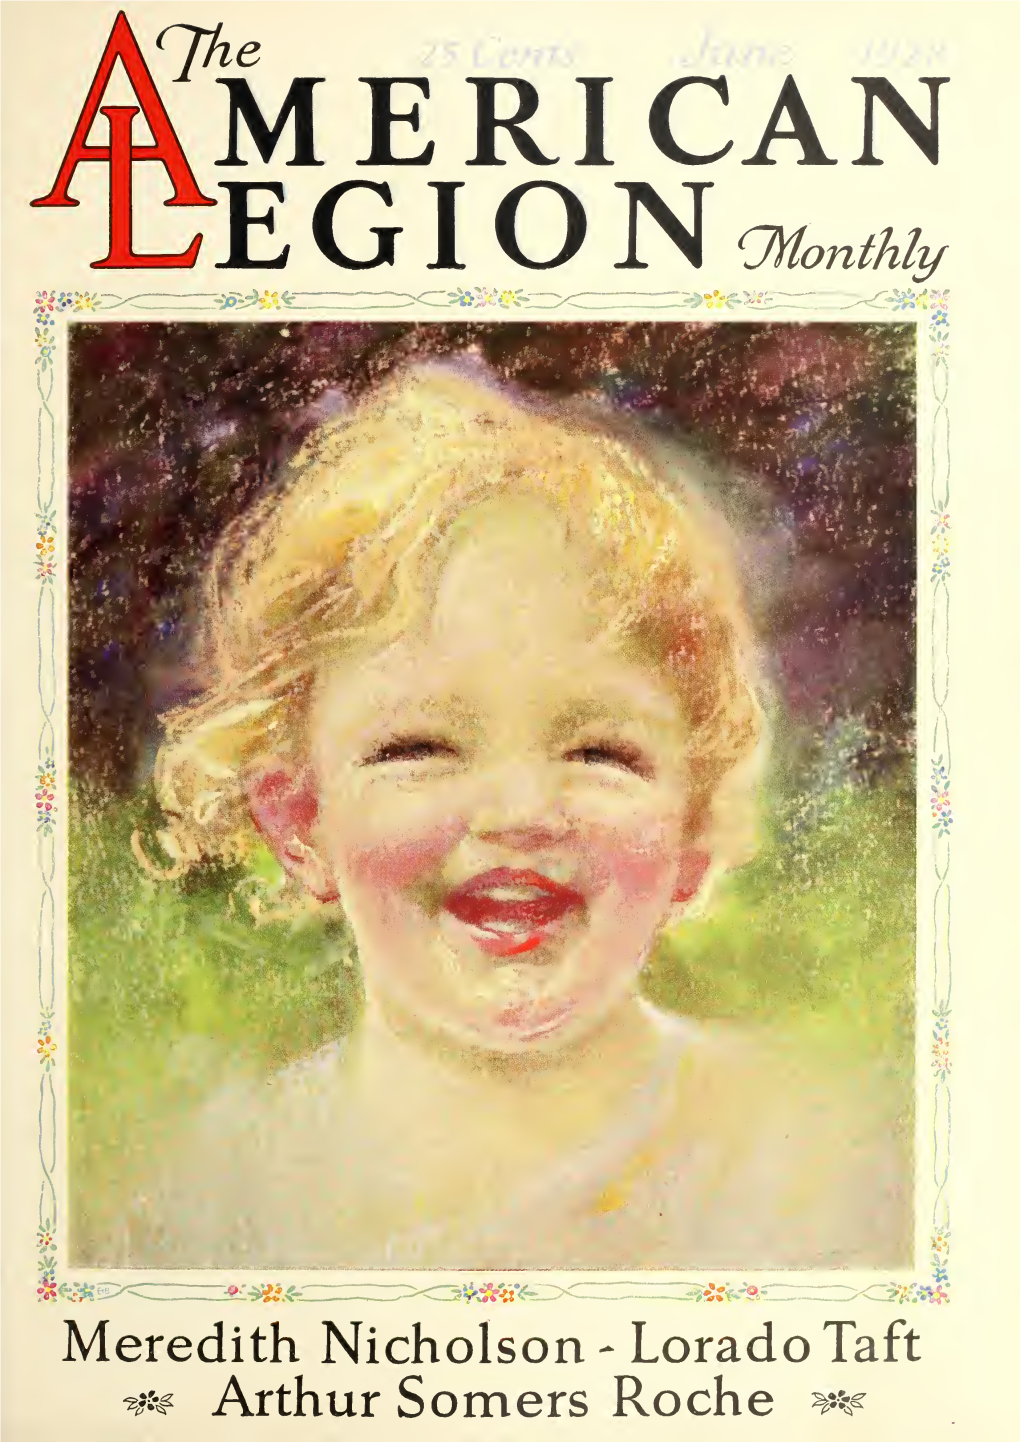 The American Legion Monthly Is the Official Publication of the American Legion and the American Legion Auxiliary and Is Owned Exclusively